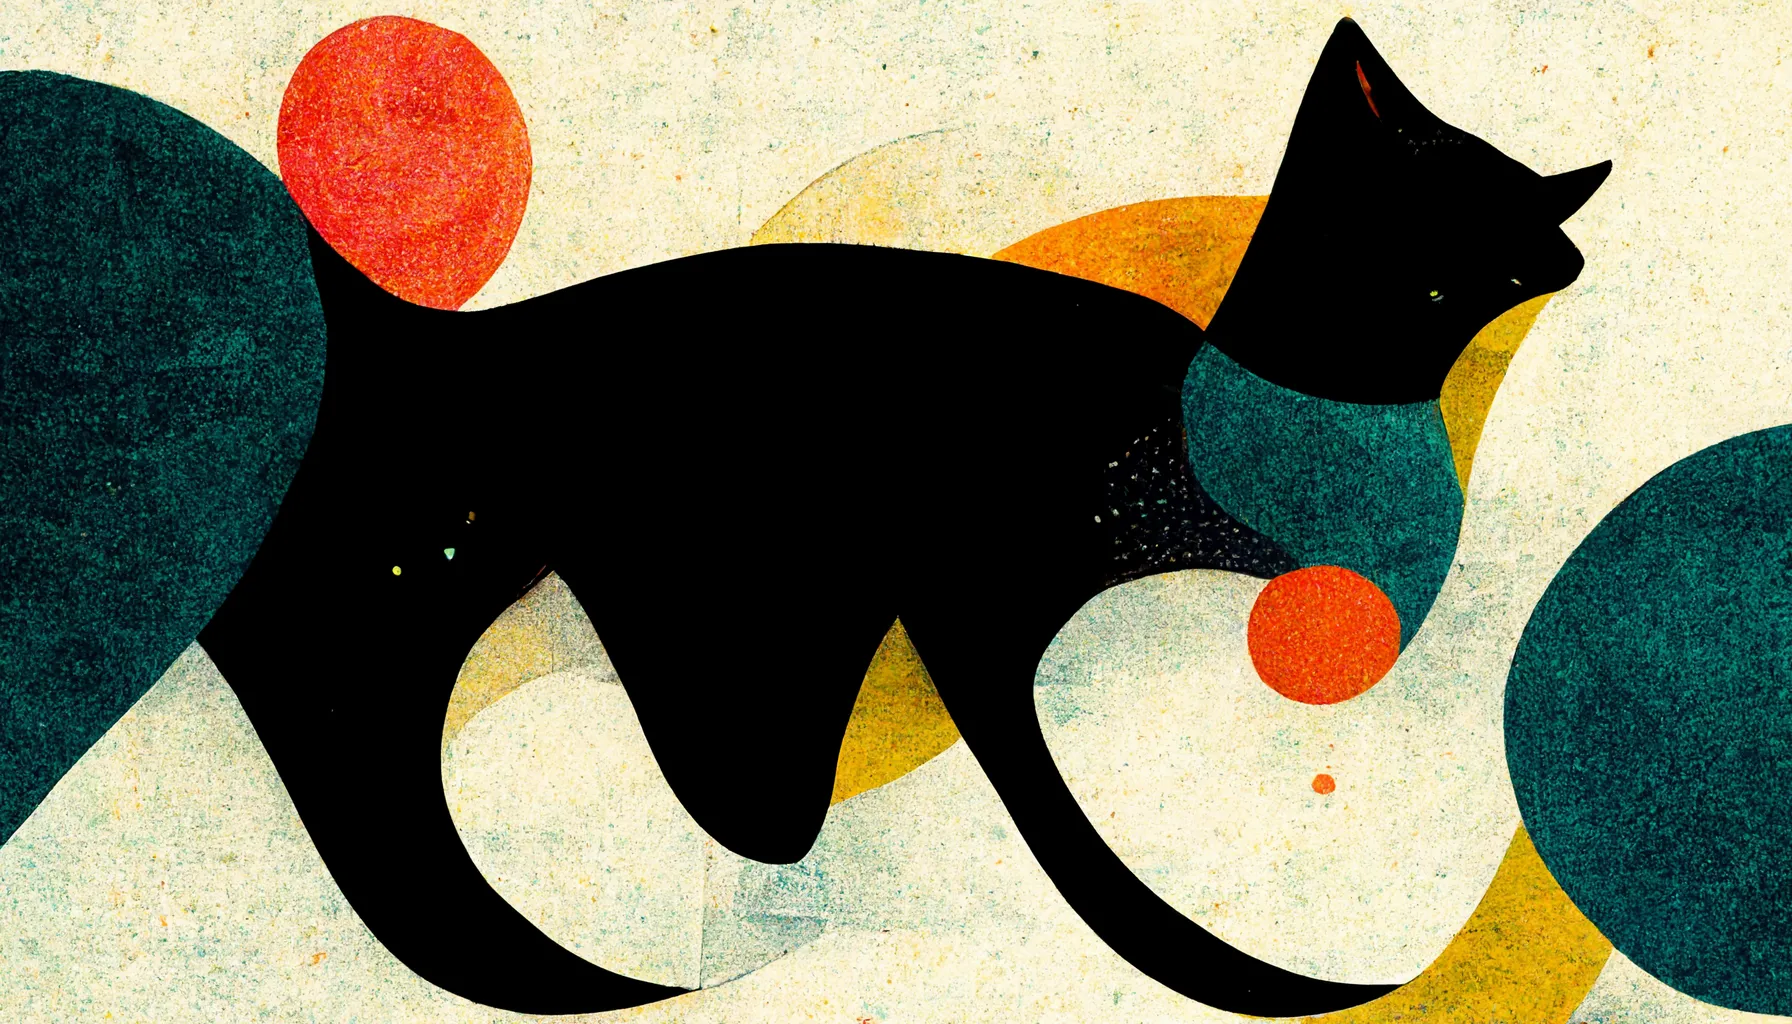 /_astro/kazbach_in_the_style_of_kandinsky_cat_geometric_abstract_335ee977-e75c-4799-a648-93c133f3ea55.png.1377cf08.webp